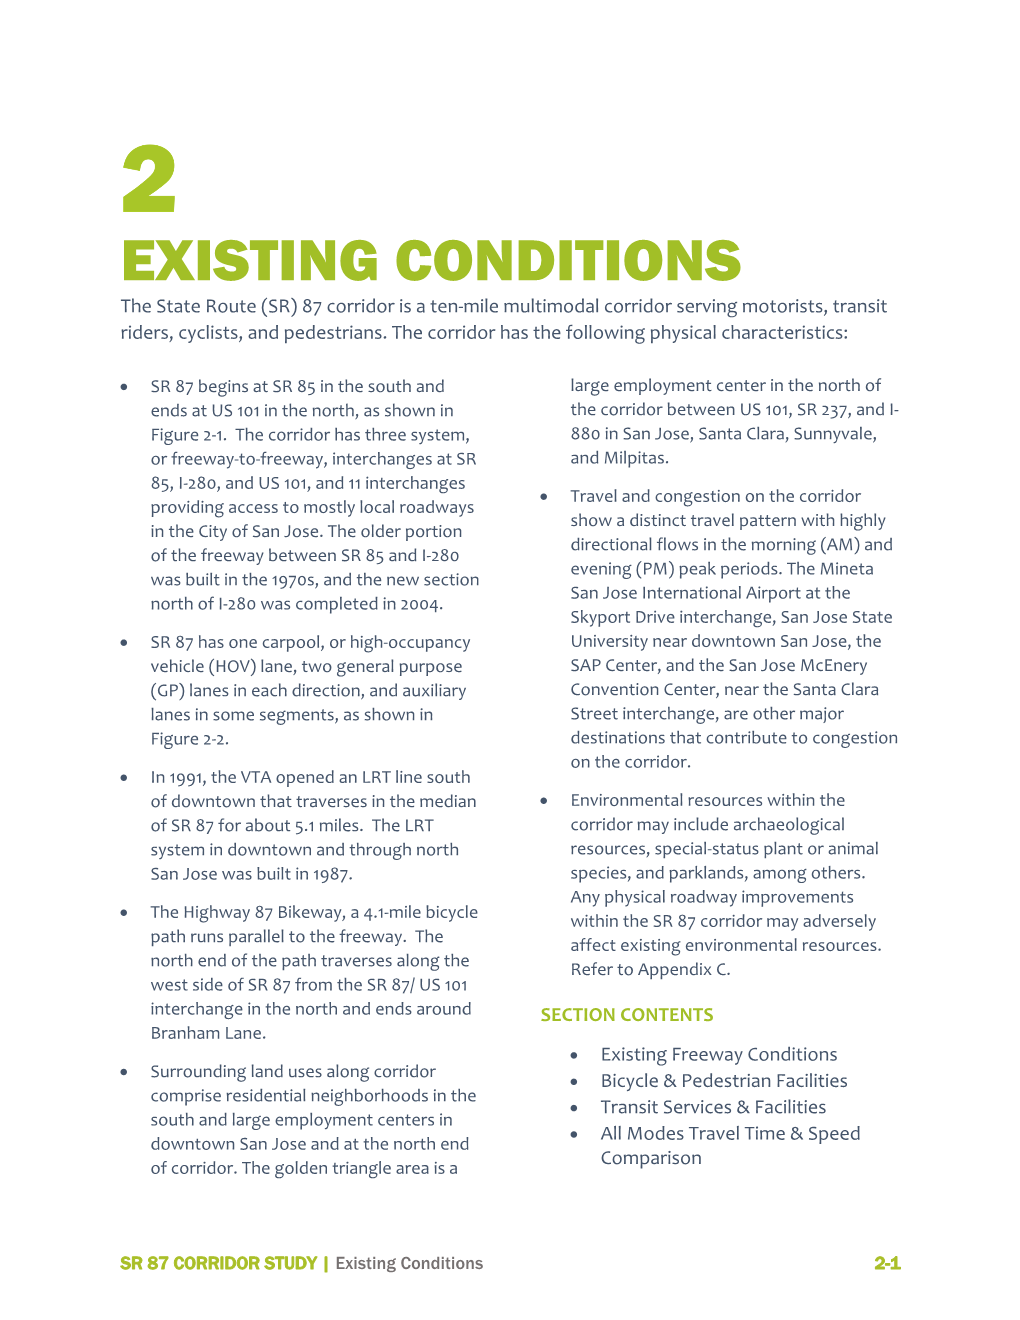 EXISTING CONDITIONS the State Route (SR) 87 Corridor Is a Ten-Mile Multimodal Corridor Serving Motorists, Transit Riders, Cyclists, and Pedestrians